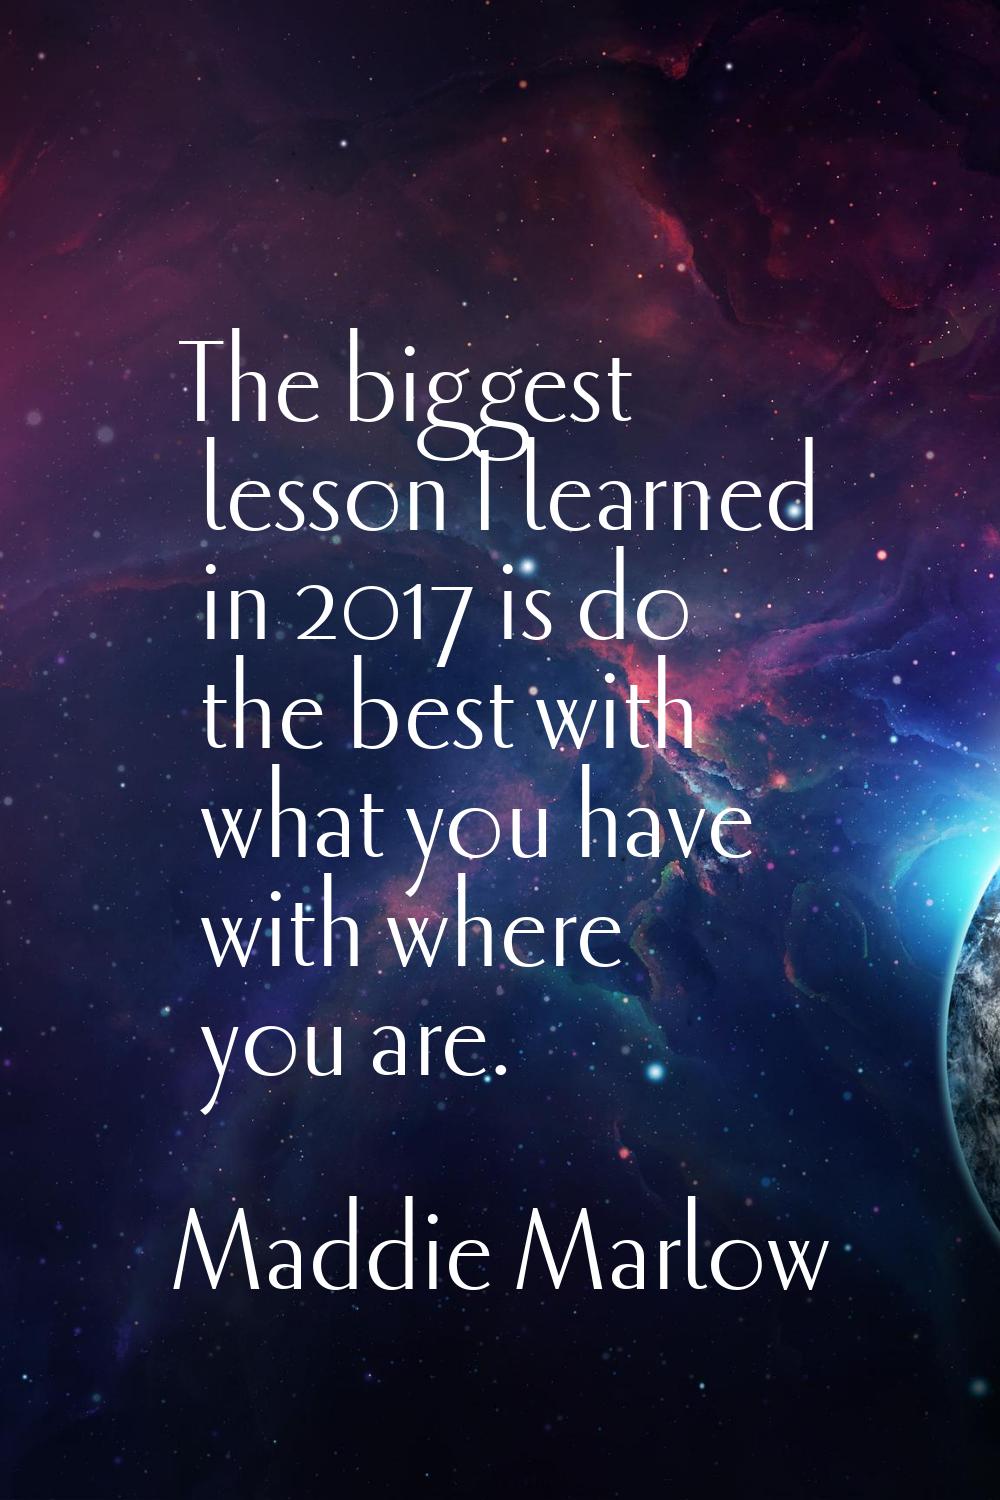 The biggest lesson I learned in 2017 is do the best with what you have with where you are.